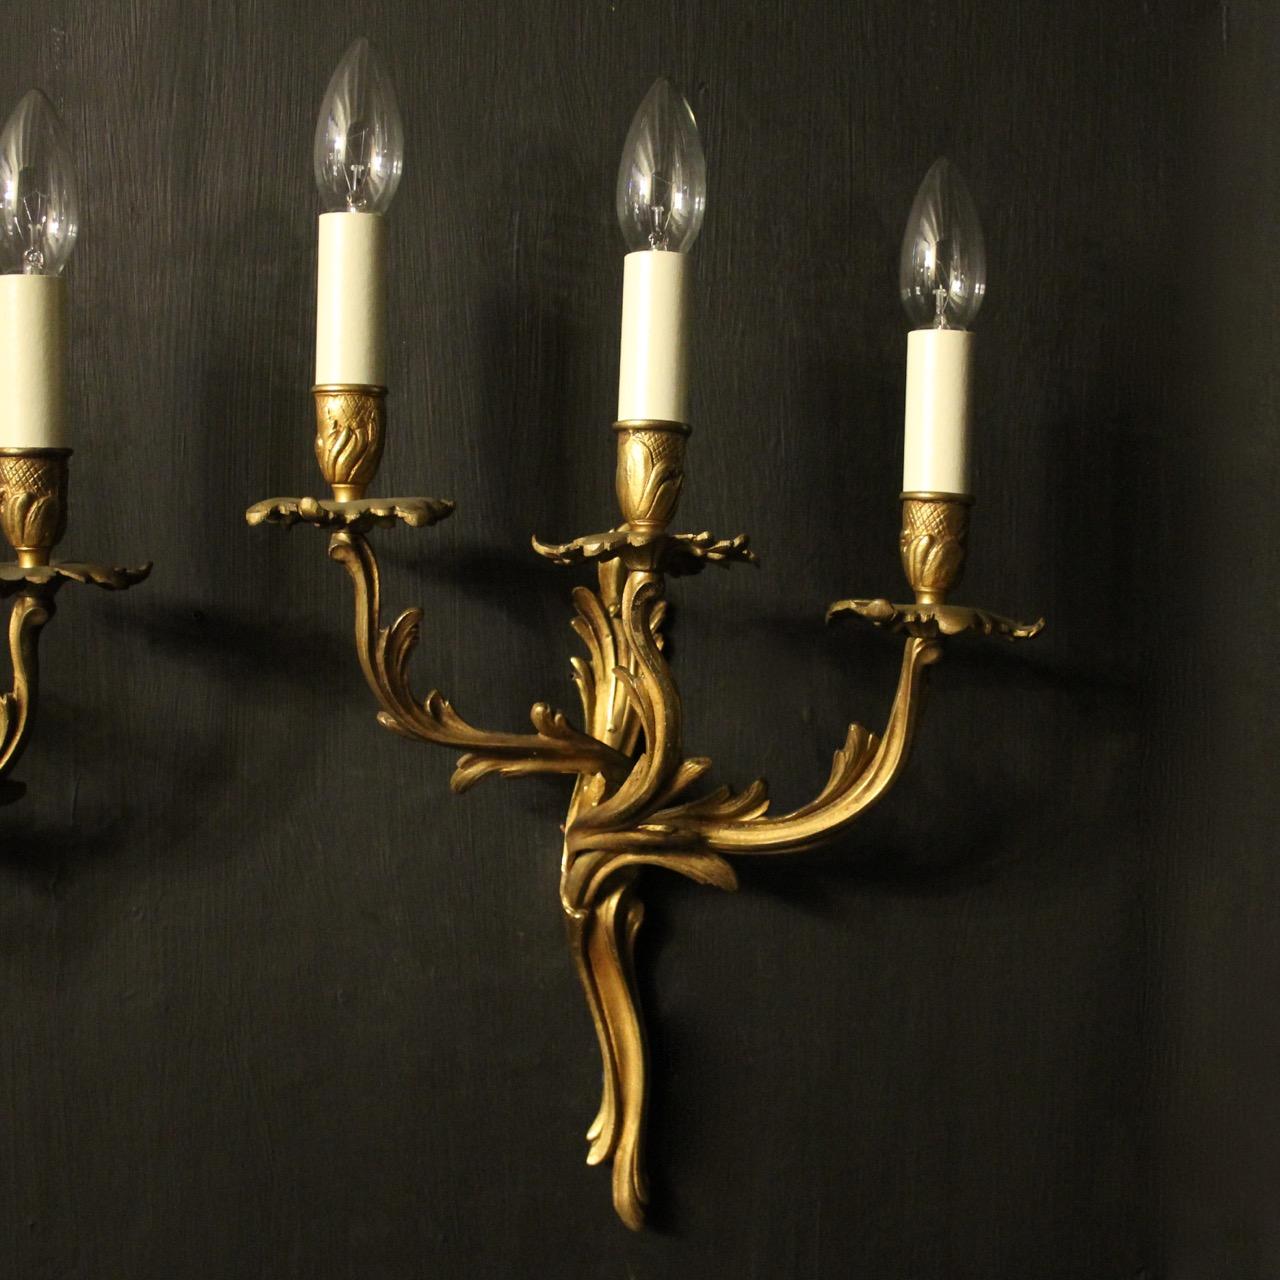 A French pair of gilded brass triple arm opposing antique wall lights, the leaf clad scrolling arms with leaf bobeche drip pans and bulbous candle sconces, issuing from an opposing leaf backplate, nice original patination and good scale. Fully